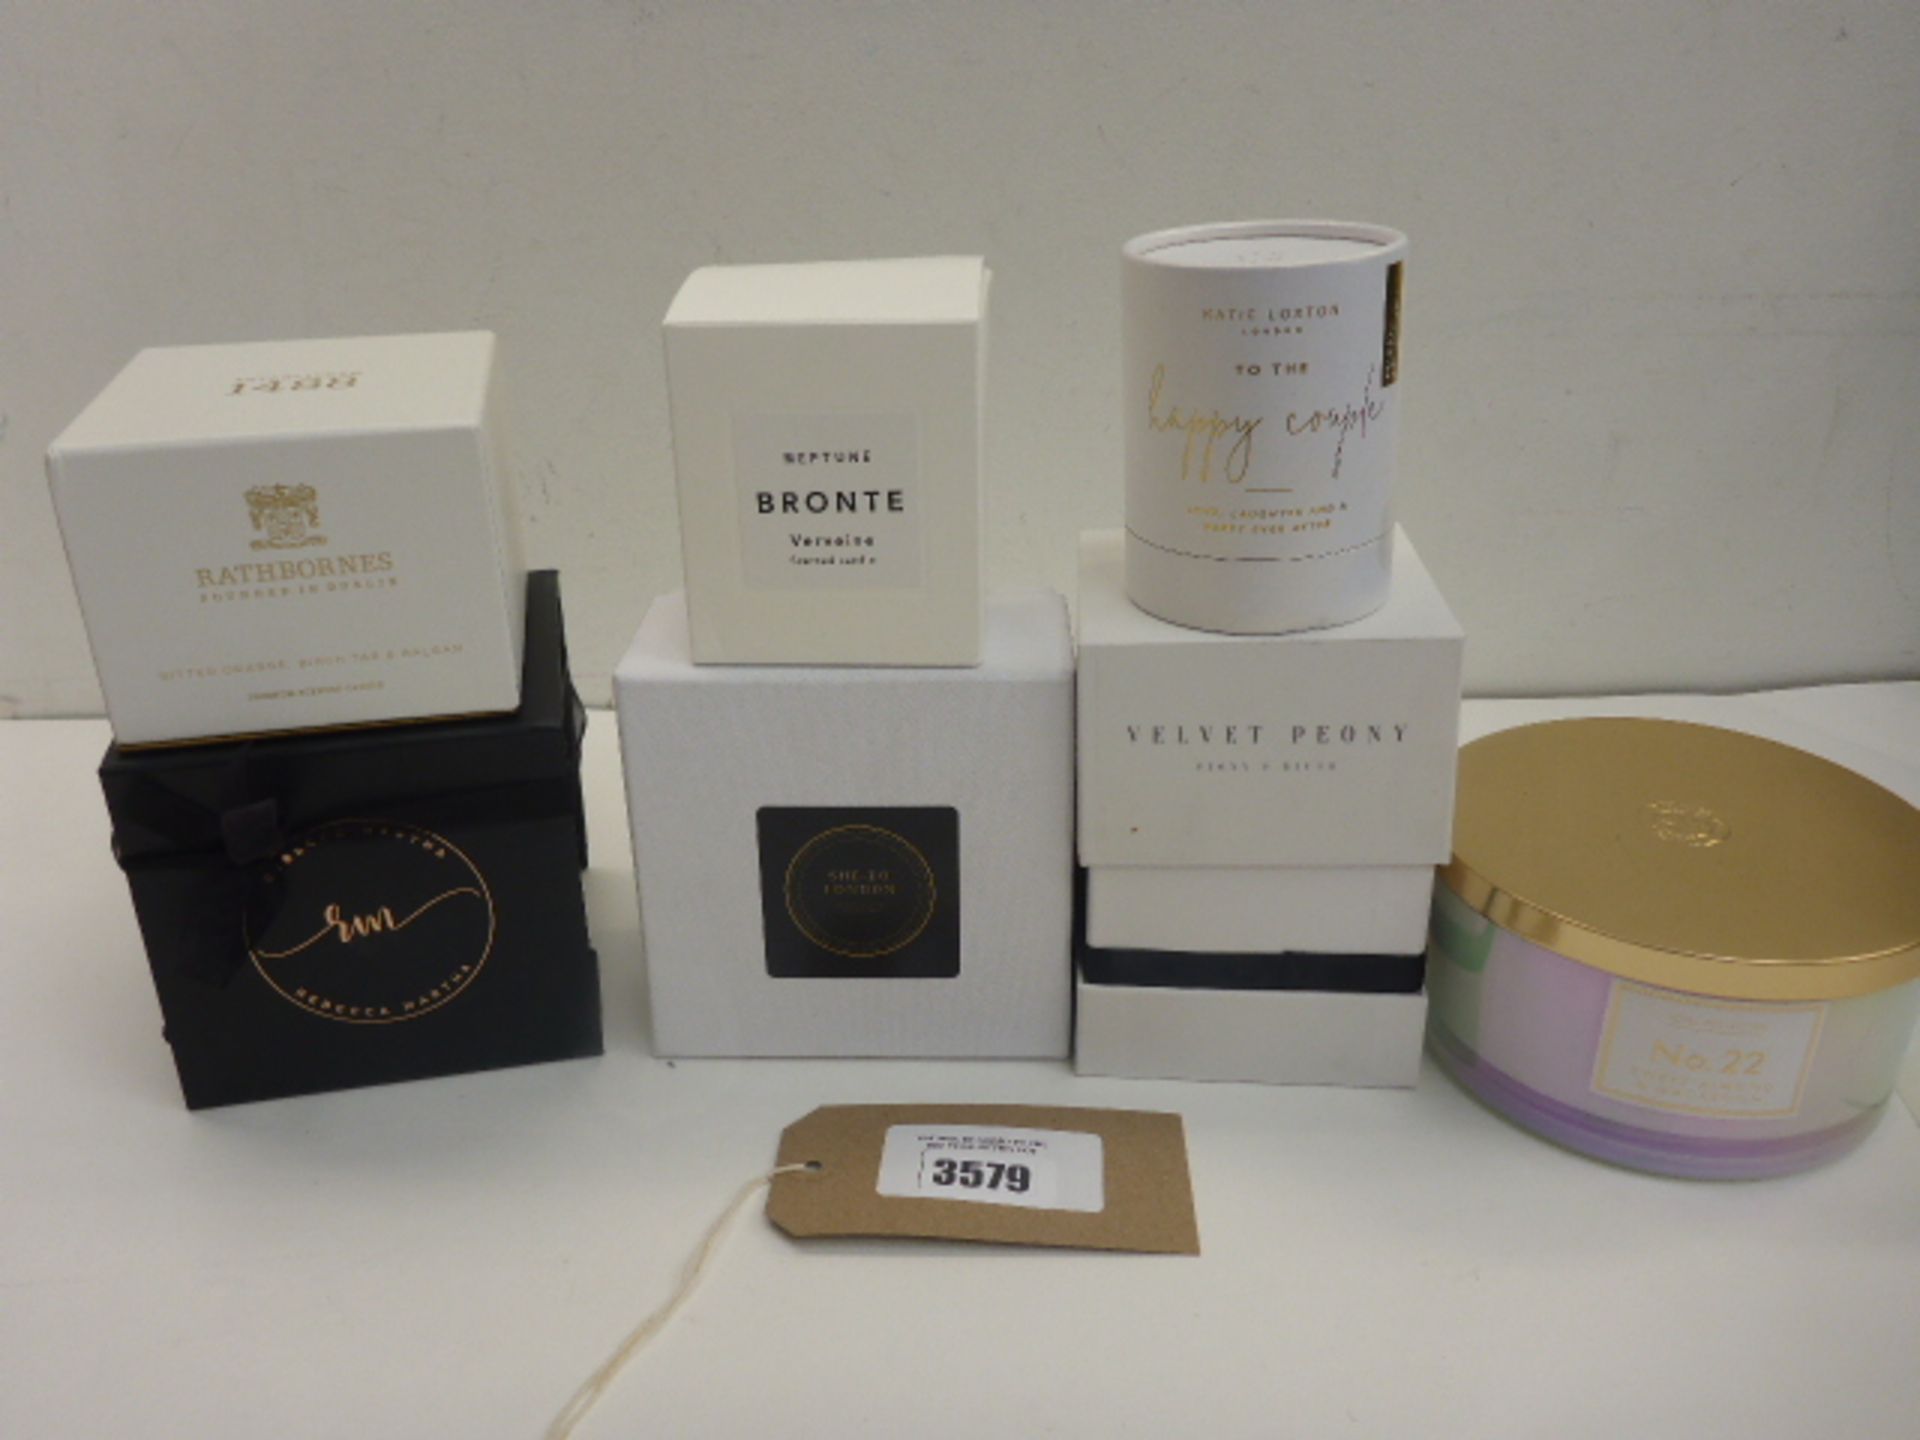 Selection of scented candles including Katie Loxton, Hotel Collection, Rathbornes, Rebecca Martha